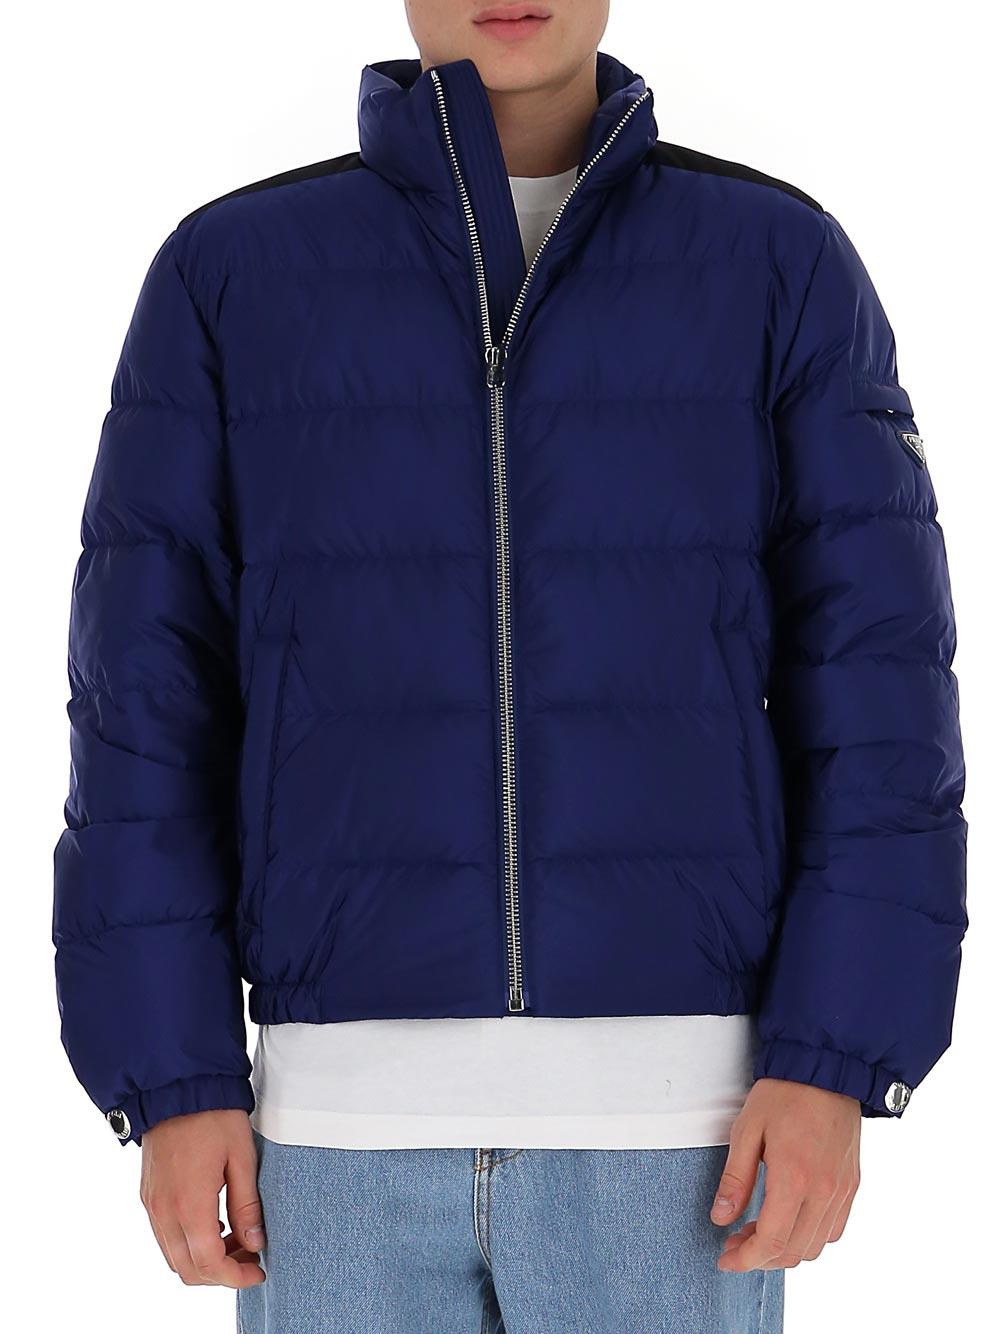 Prada Synthetic Triangle Logo Puffer Jacket in Blue for Men - Lyst